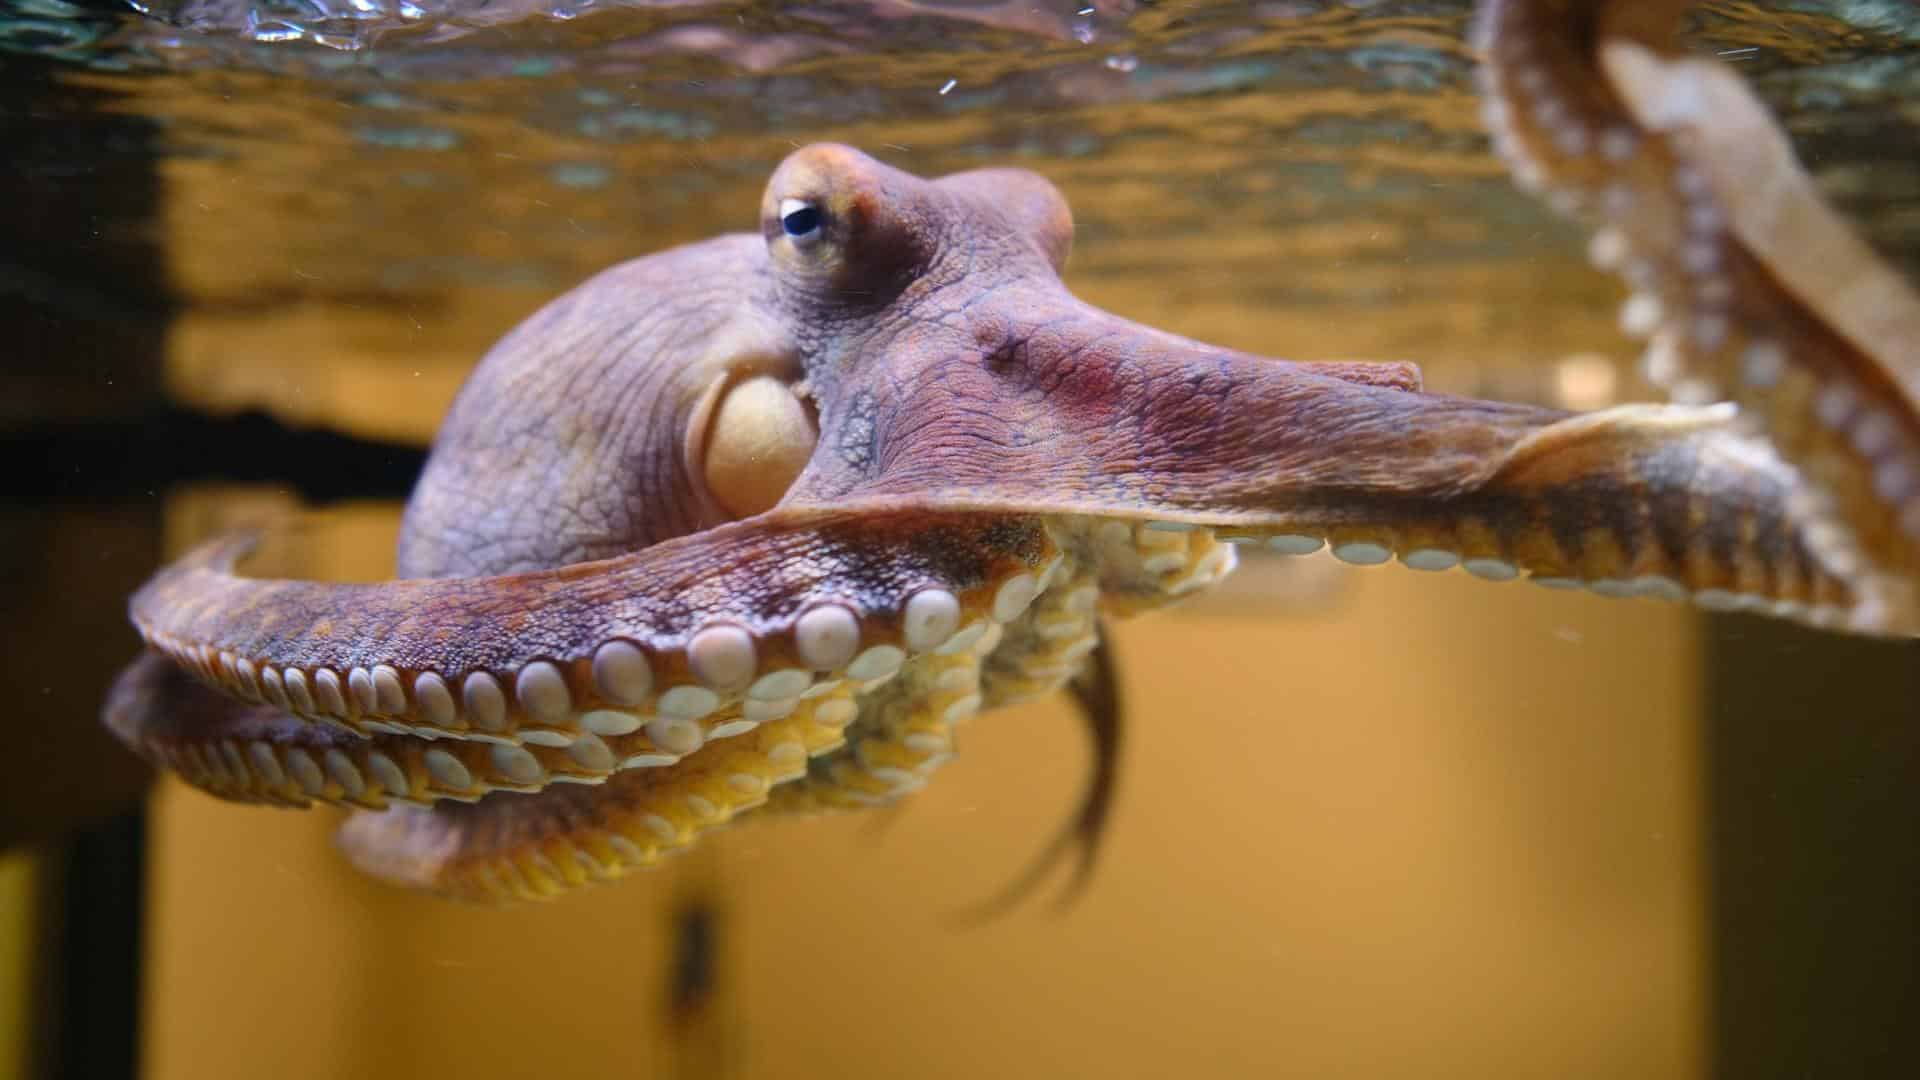  How Small Of A Hole Can An Octopus Fit Through